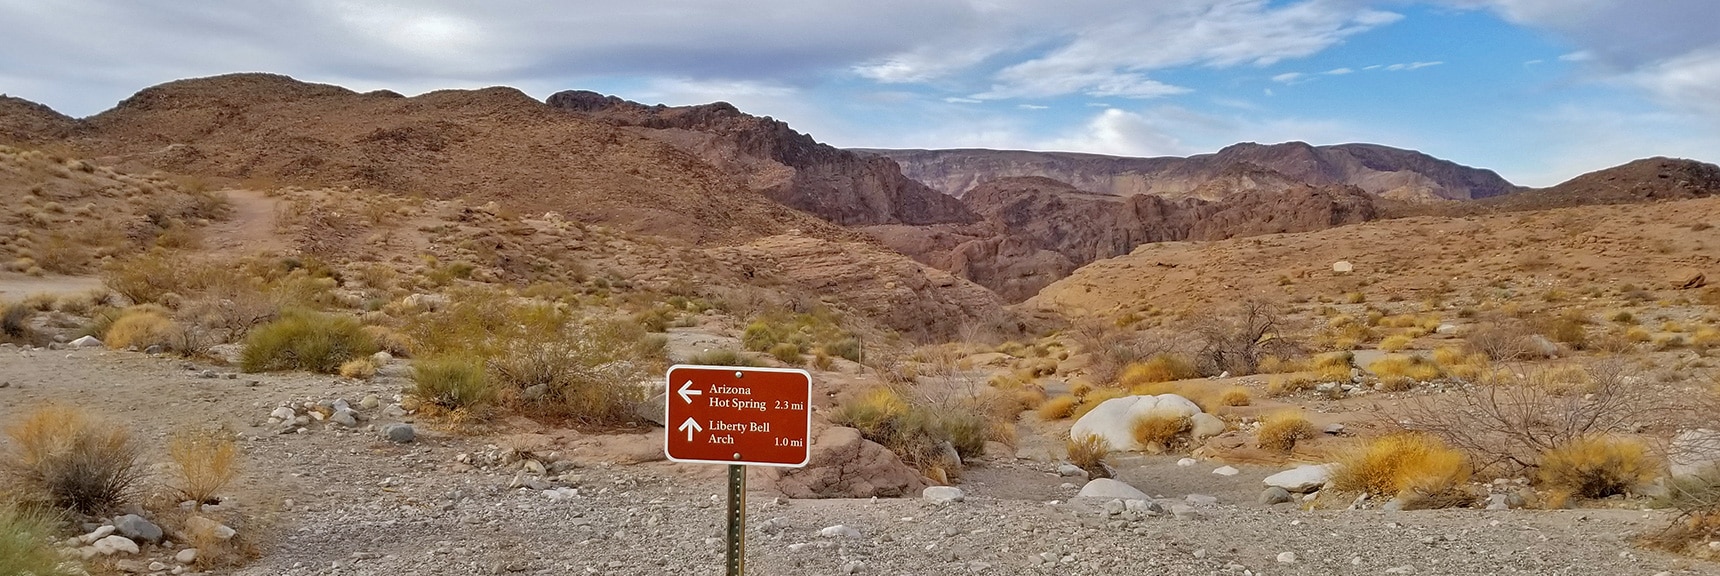 Loop Begins with Choice of Northern or Southern Wash Approach | Arizona Hot Spring | Liberty Bell Arch | Lake Mead National Recreation Area, Arizona